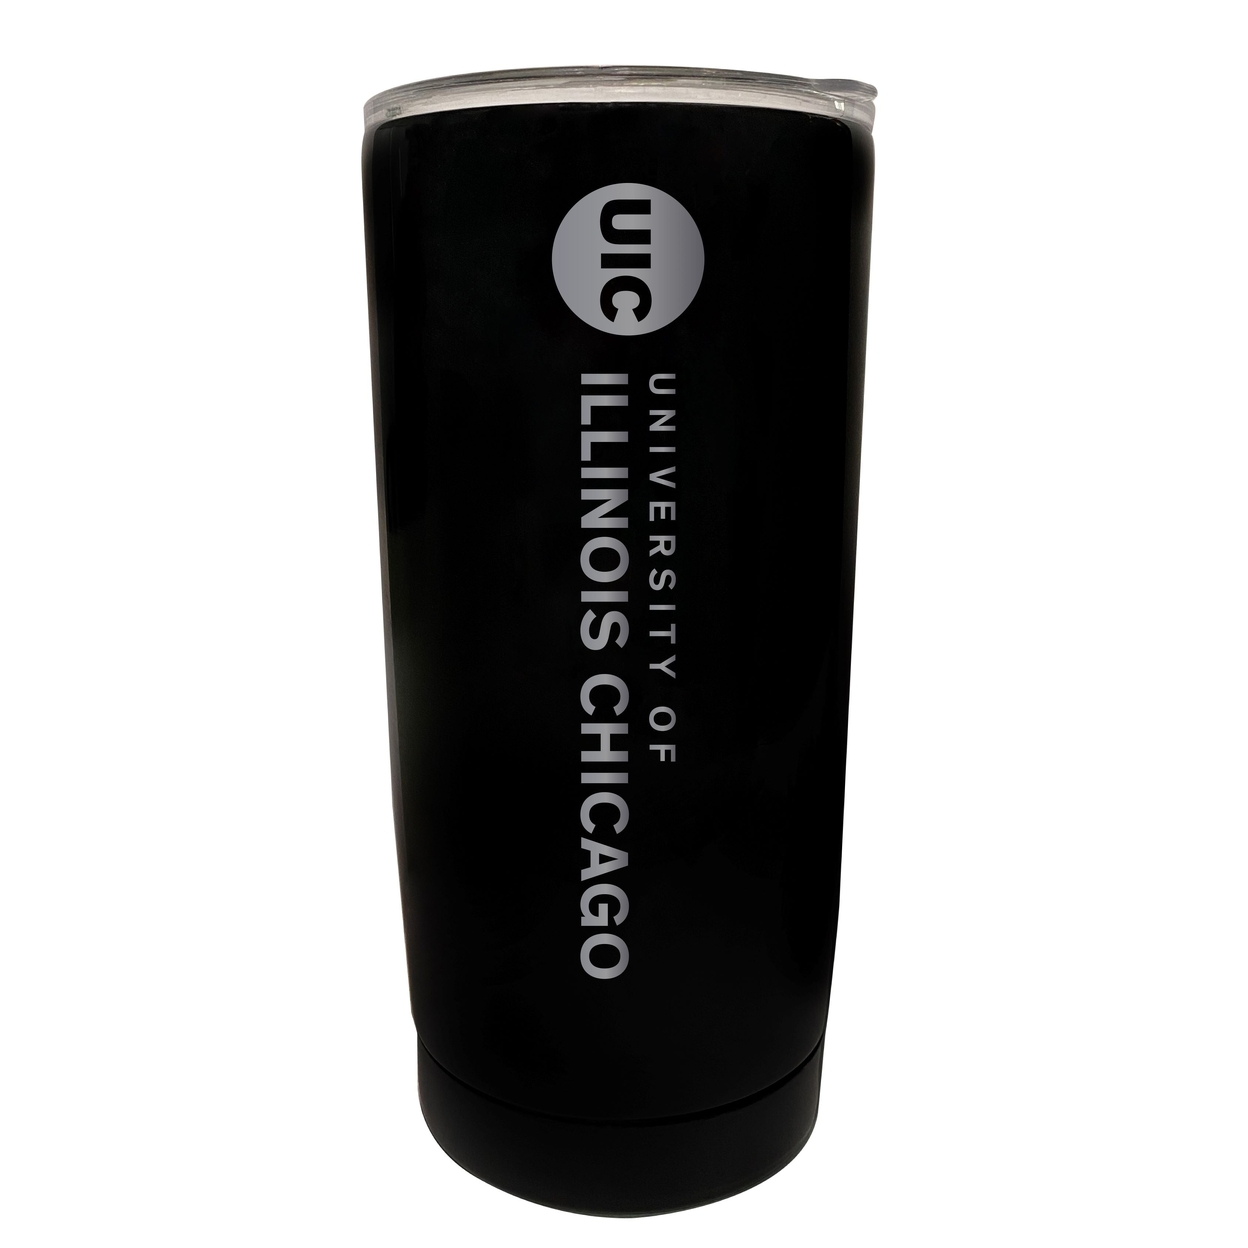 University Of Illinois At Chicago 16 Oz Stainless Steel Etched Tumbler - Choose Your Color - Black